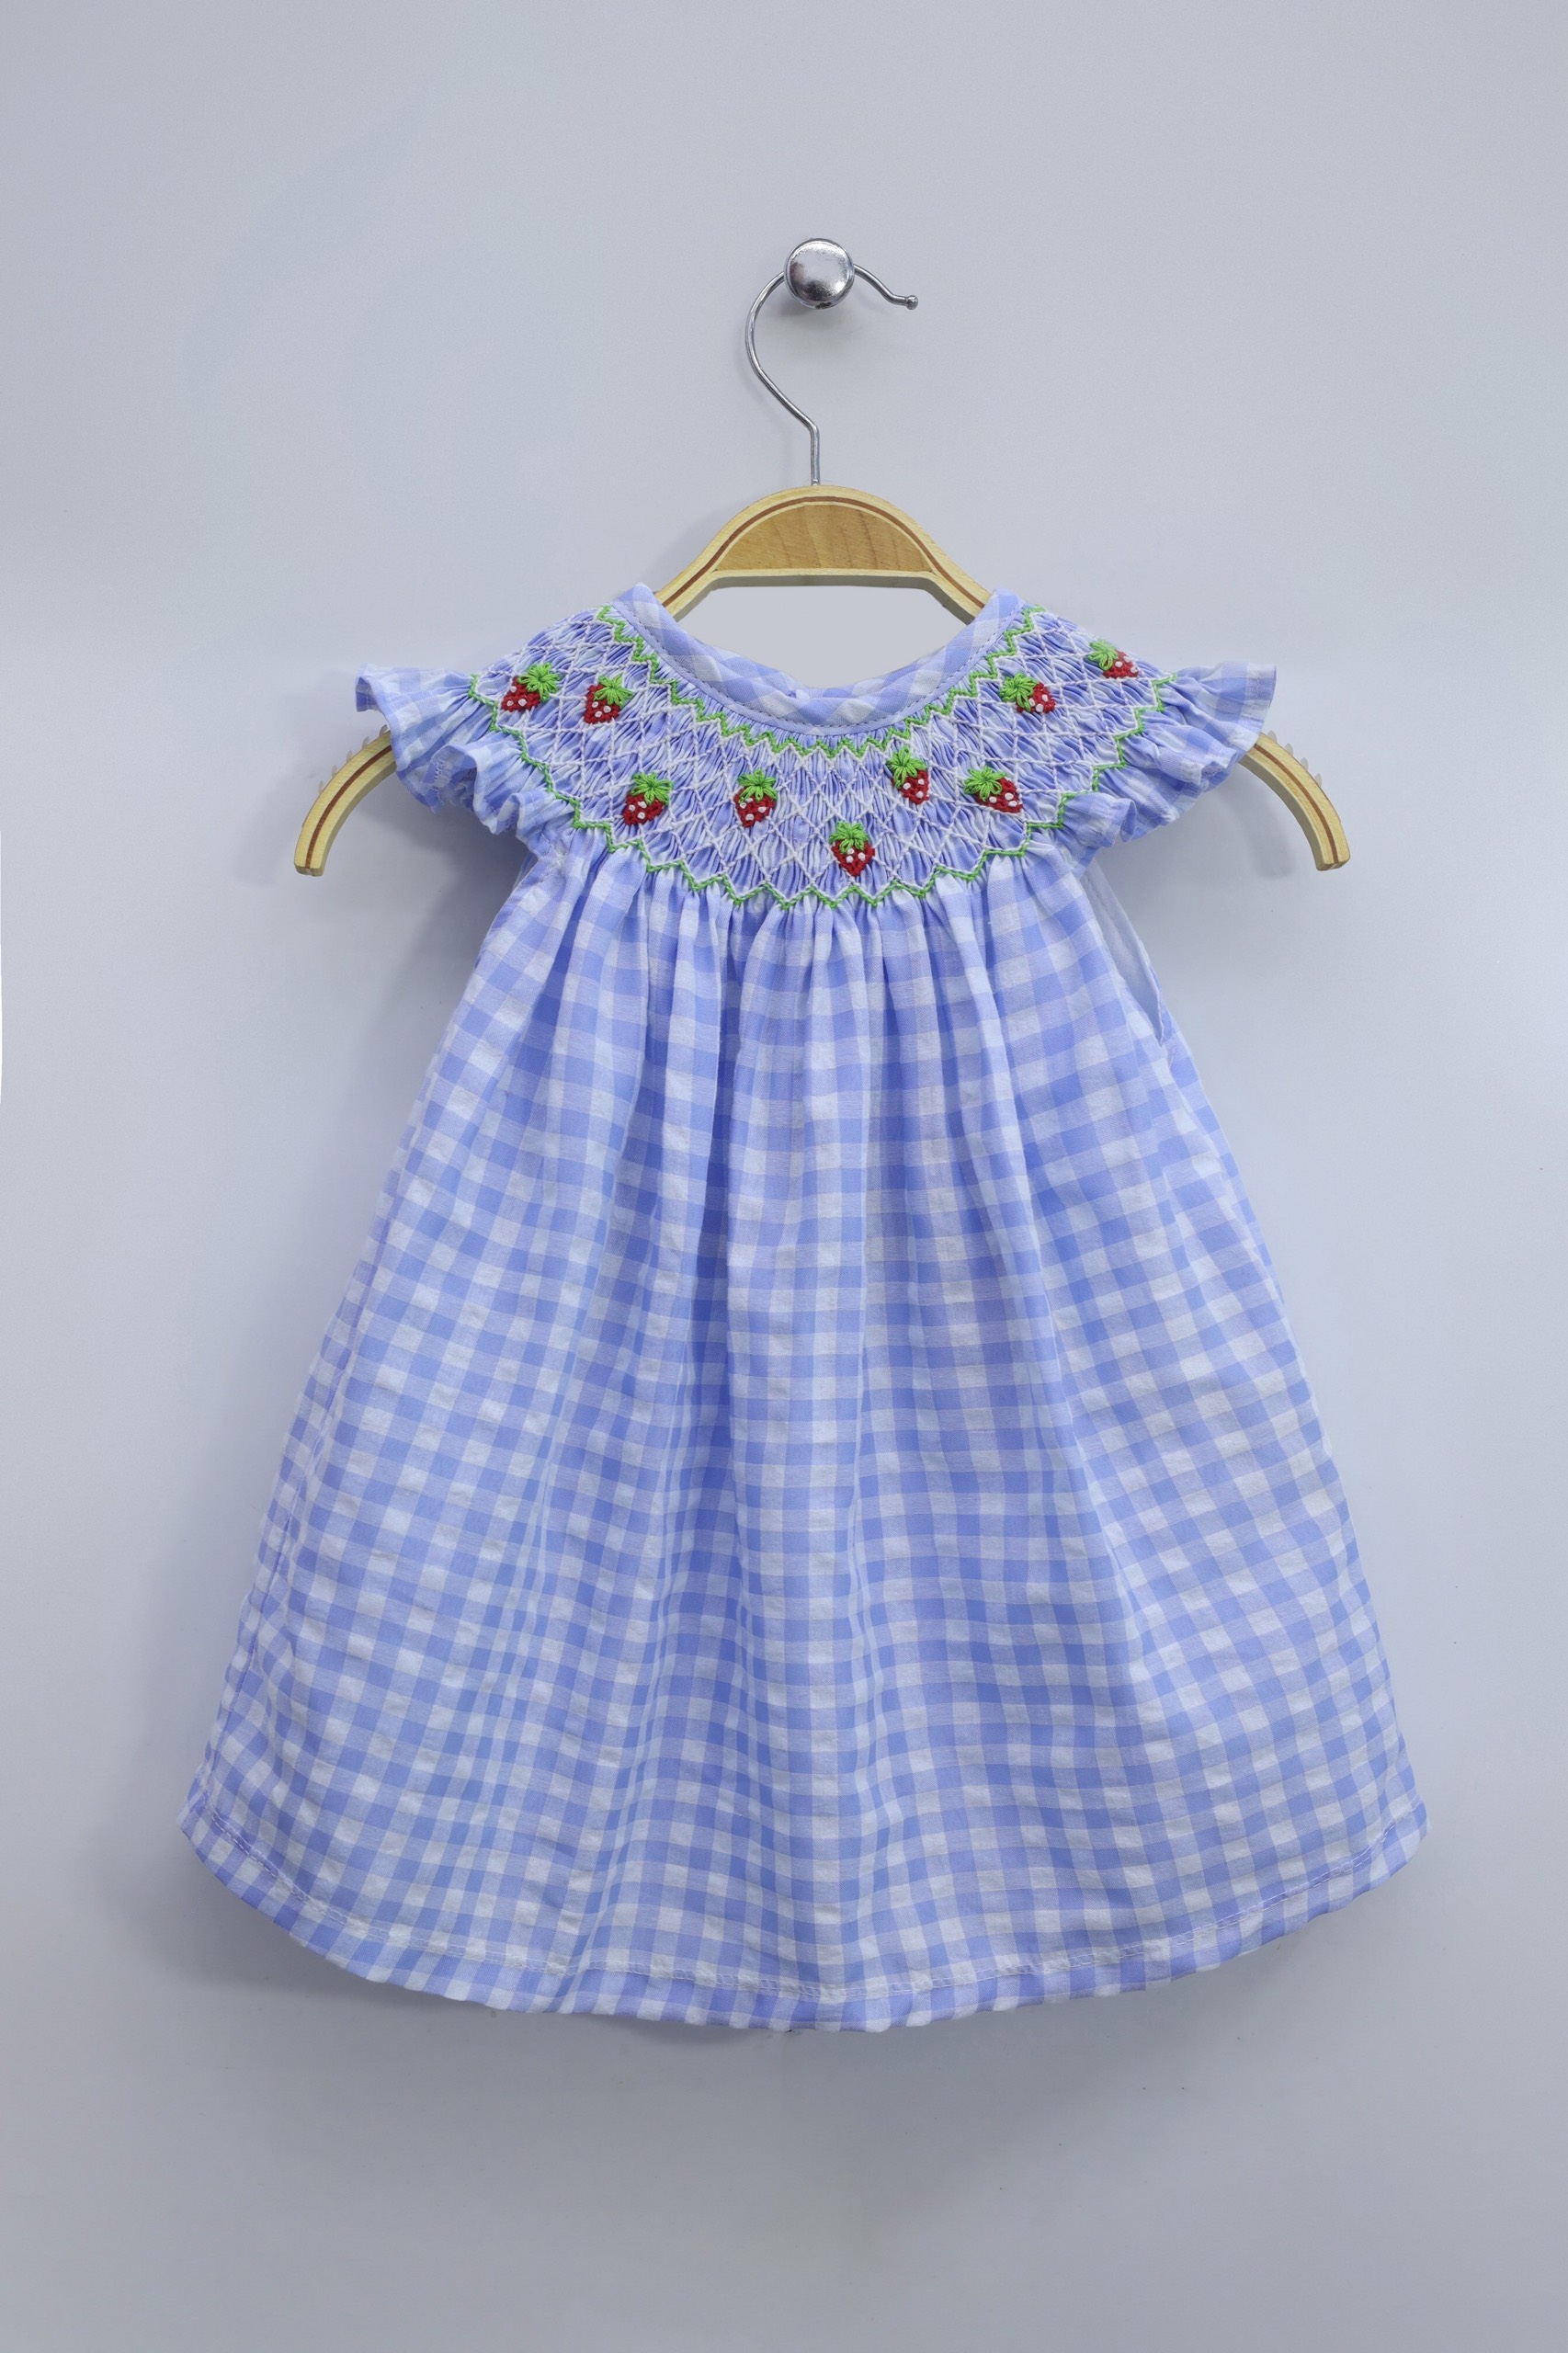 Blue Smocked Dress To Wear For A Picnic - SG141